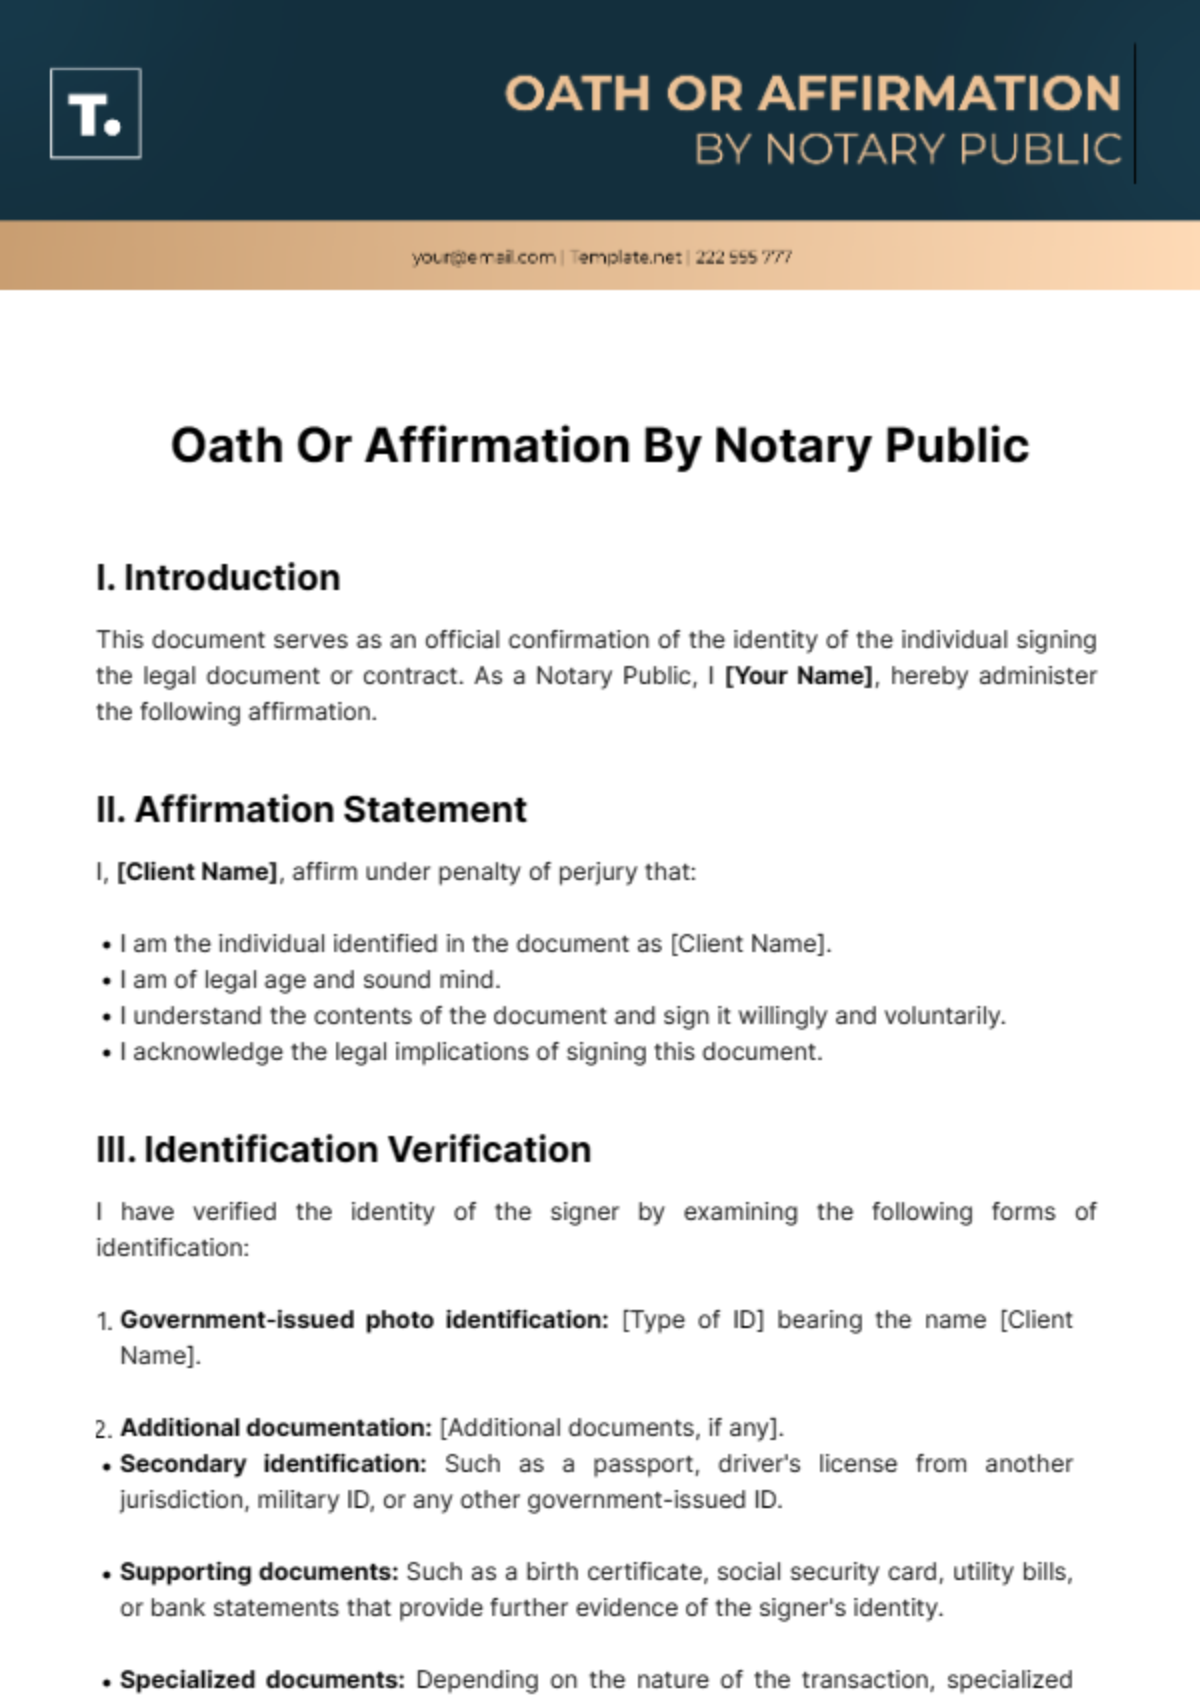 Oath Or Affirmation By Notary Public Template